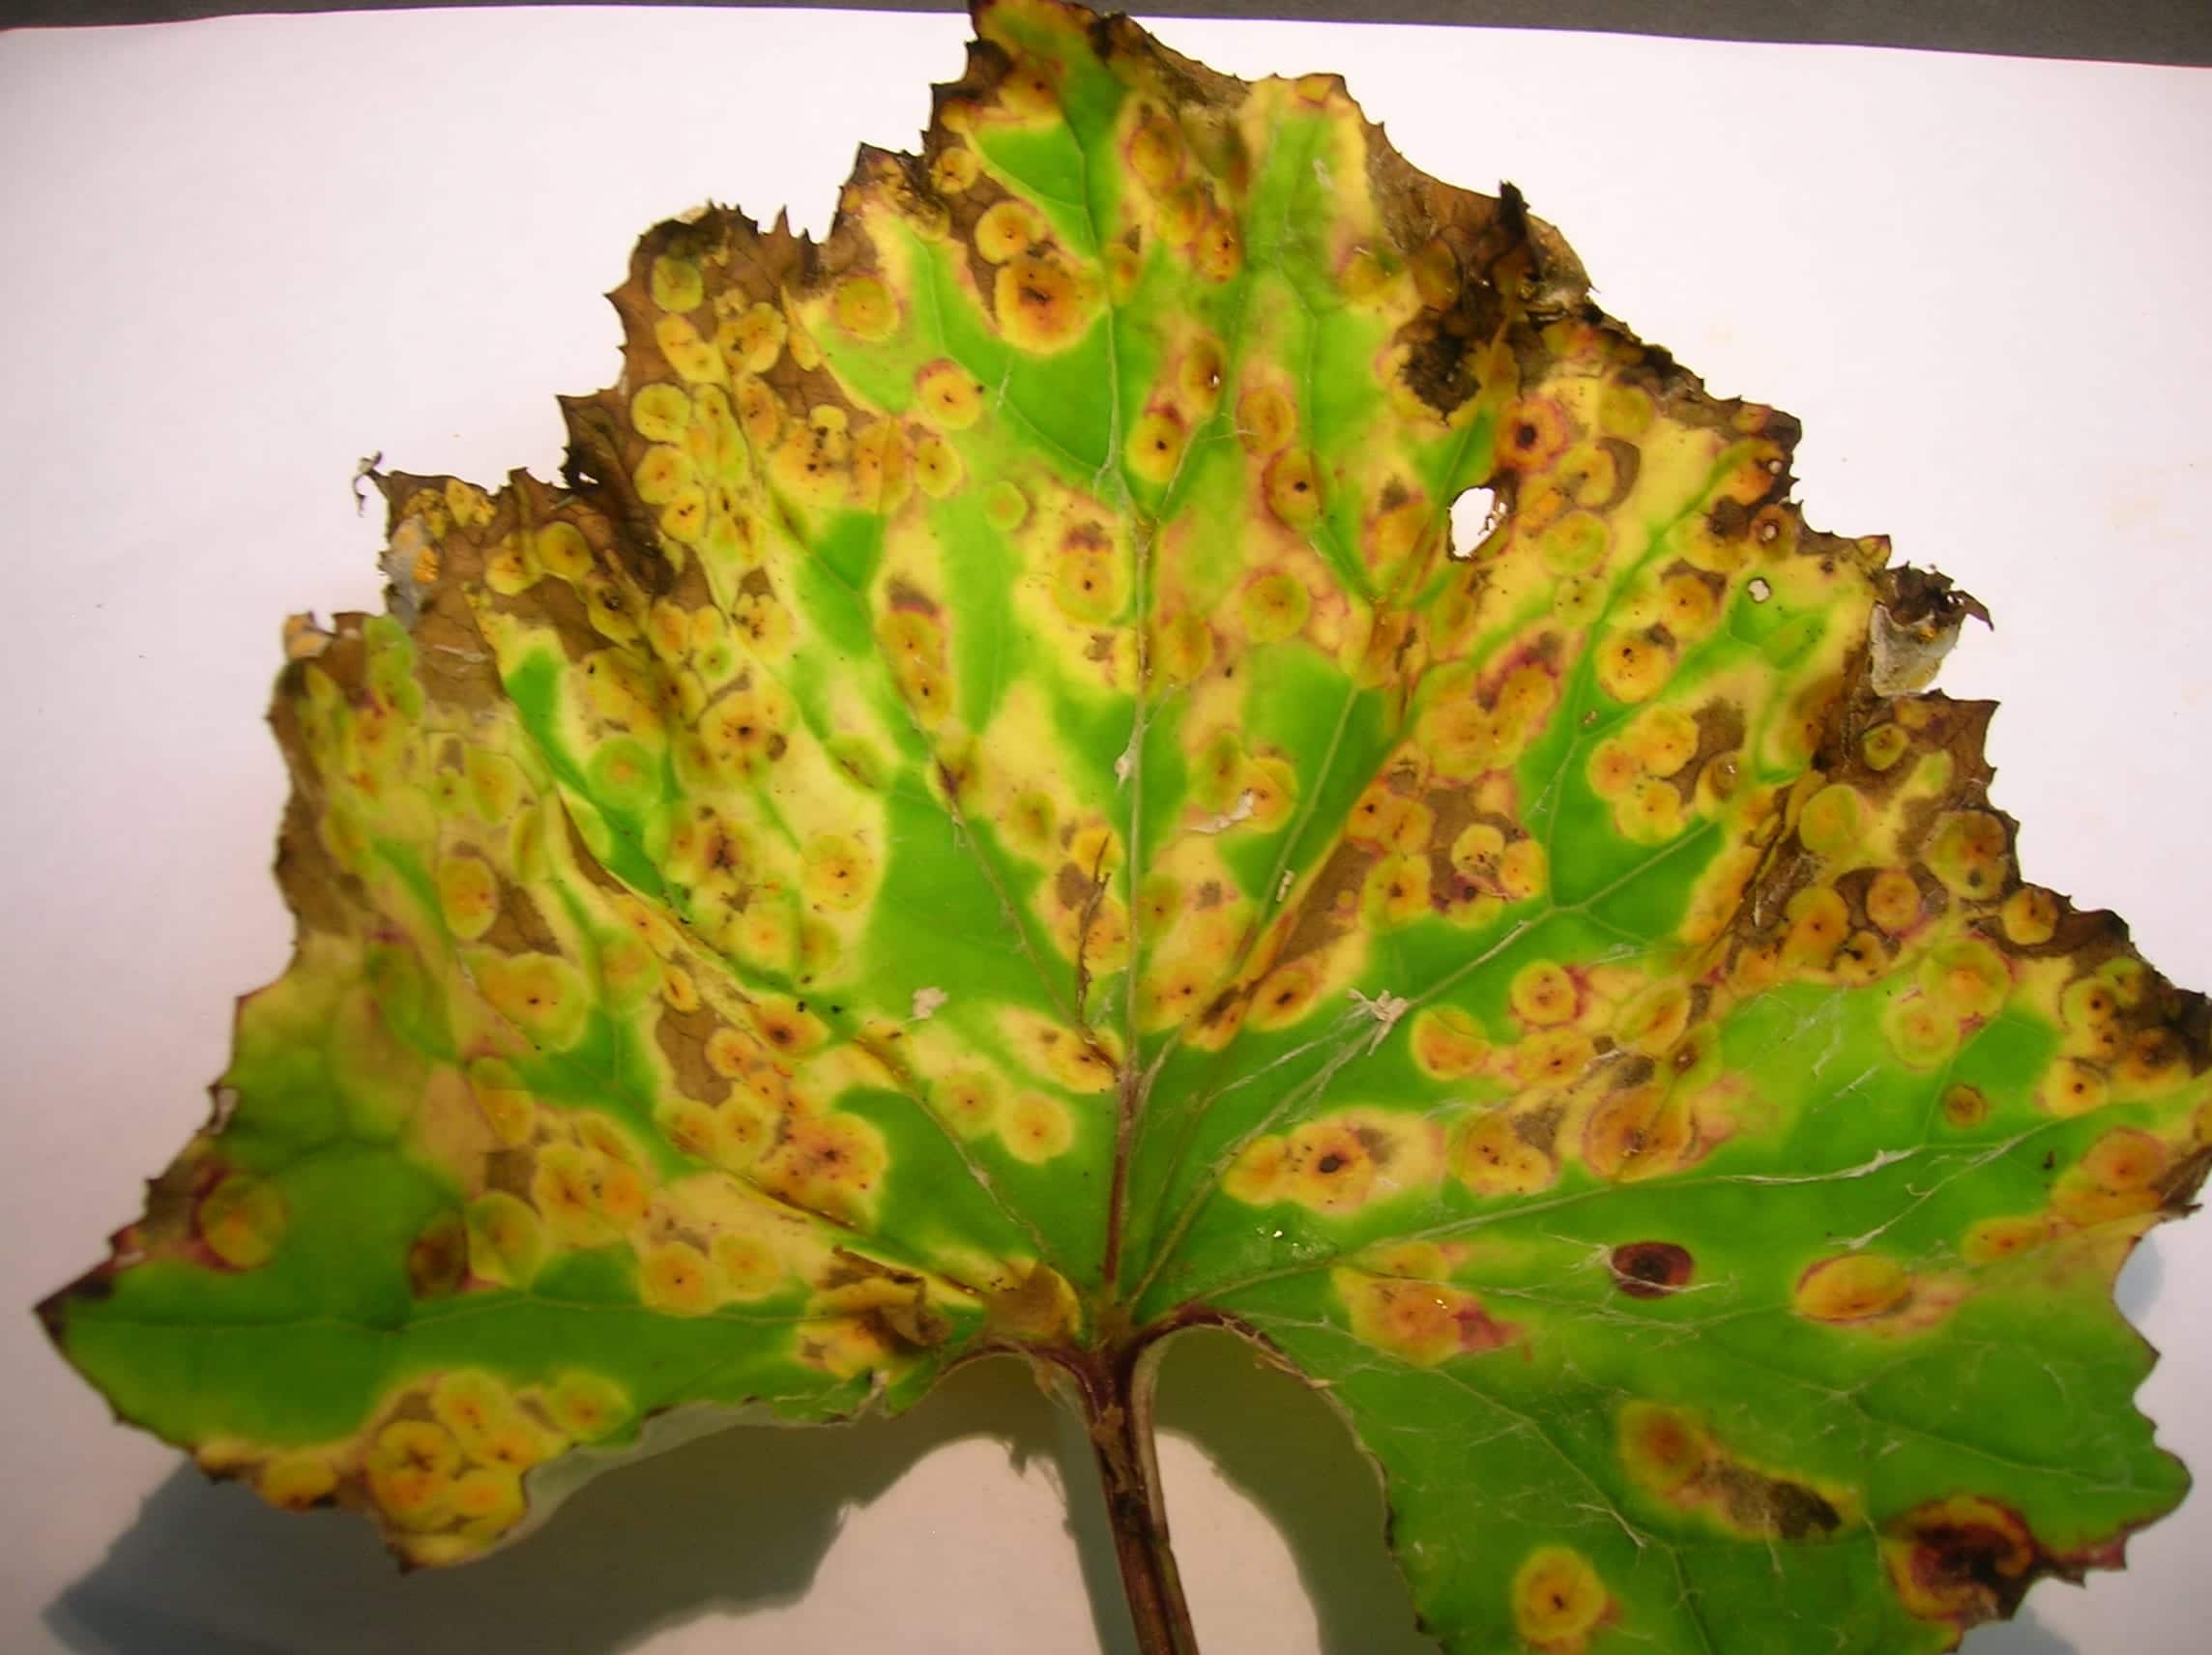 How to cure fungus on plant leaves